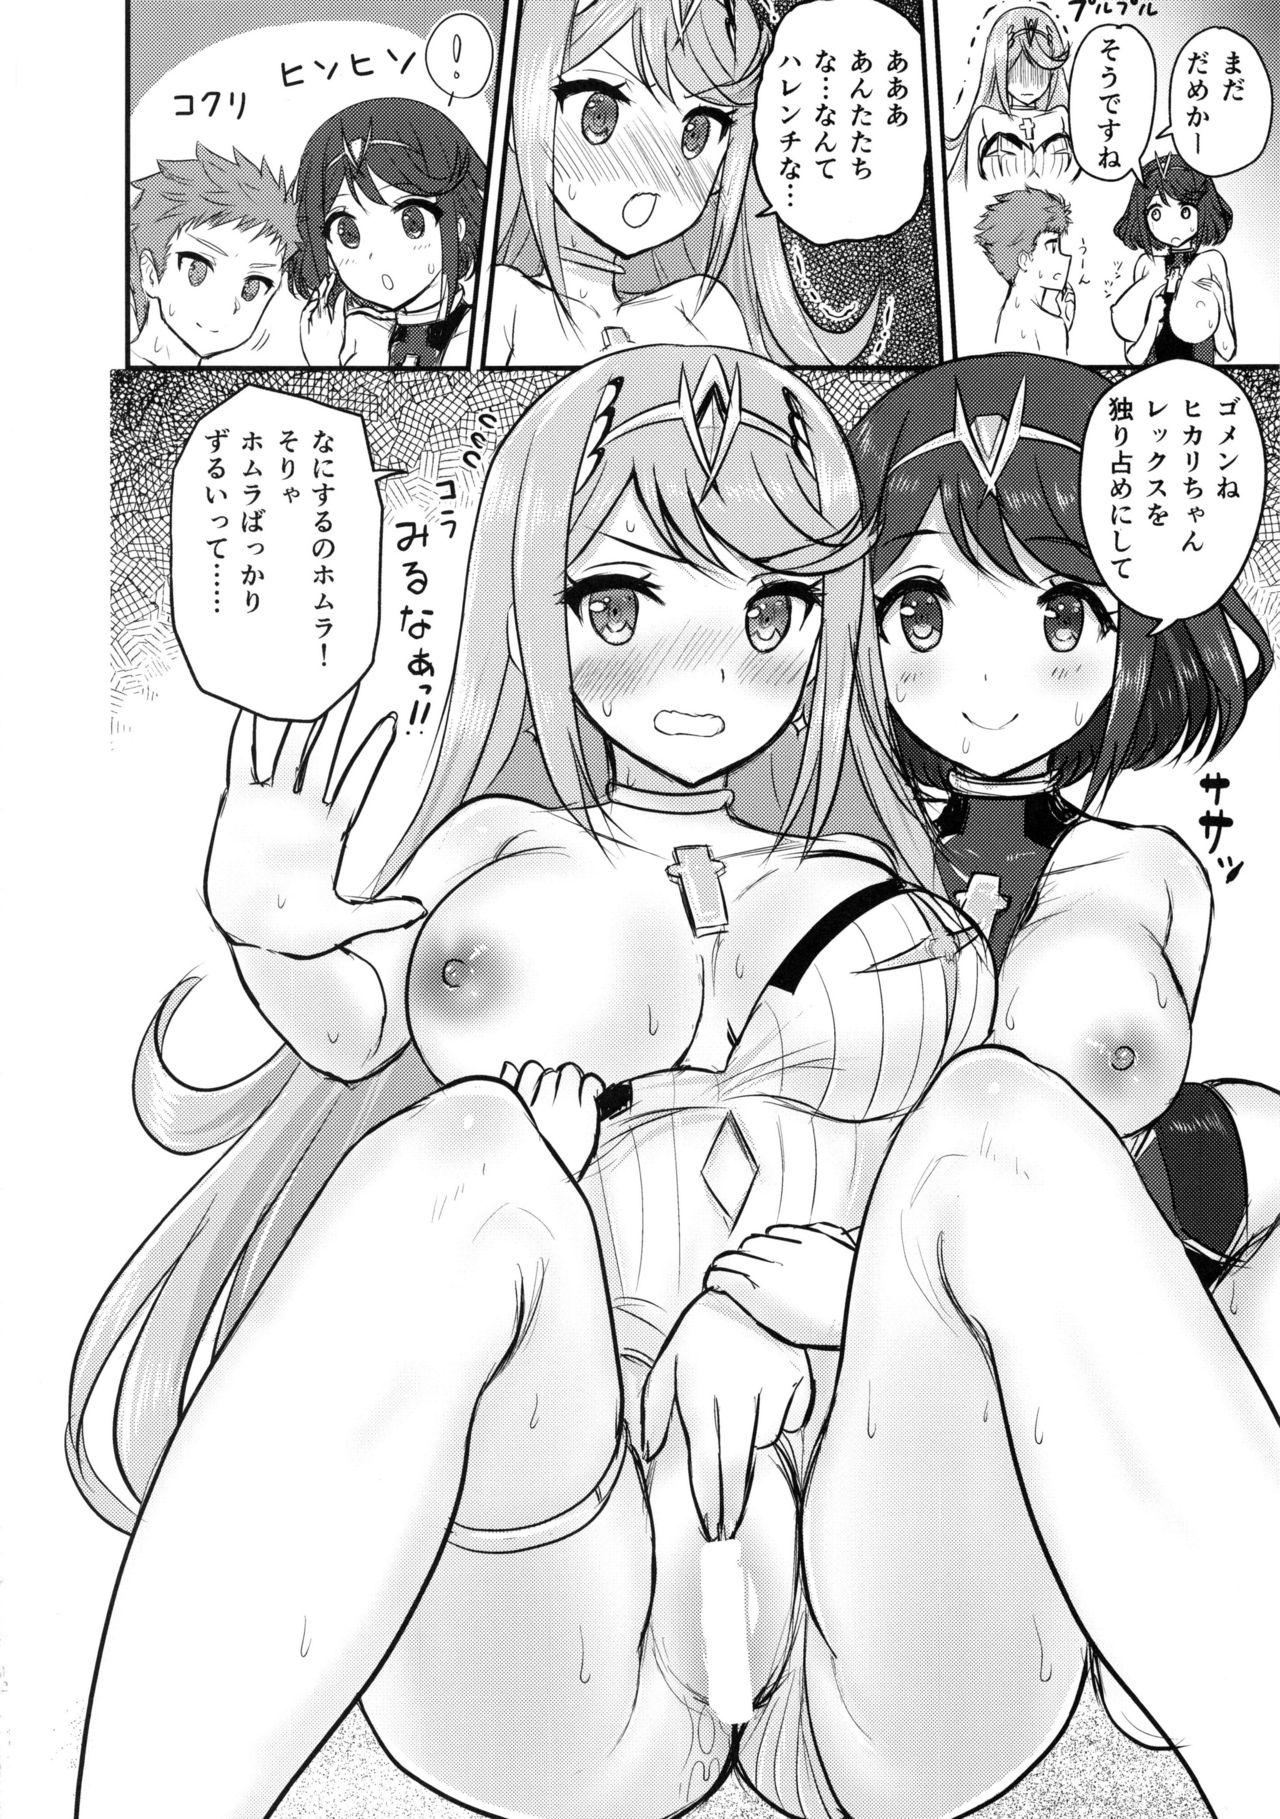 Nylons Boy Meets Girls - Xenoblade chronicles 2 Lesbos - Page 11